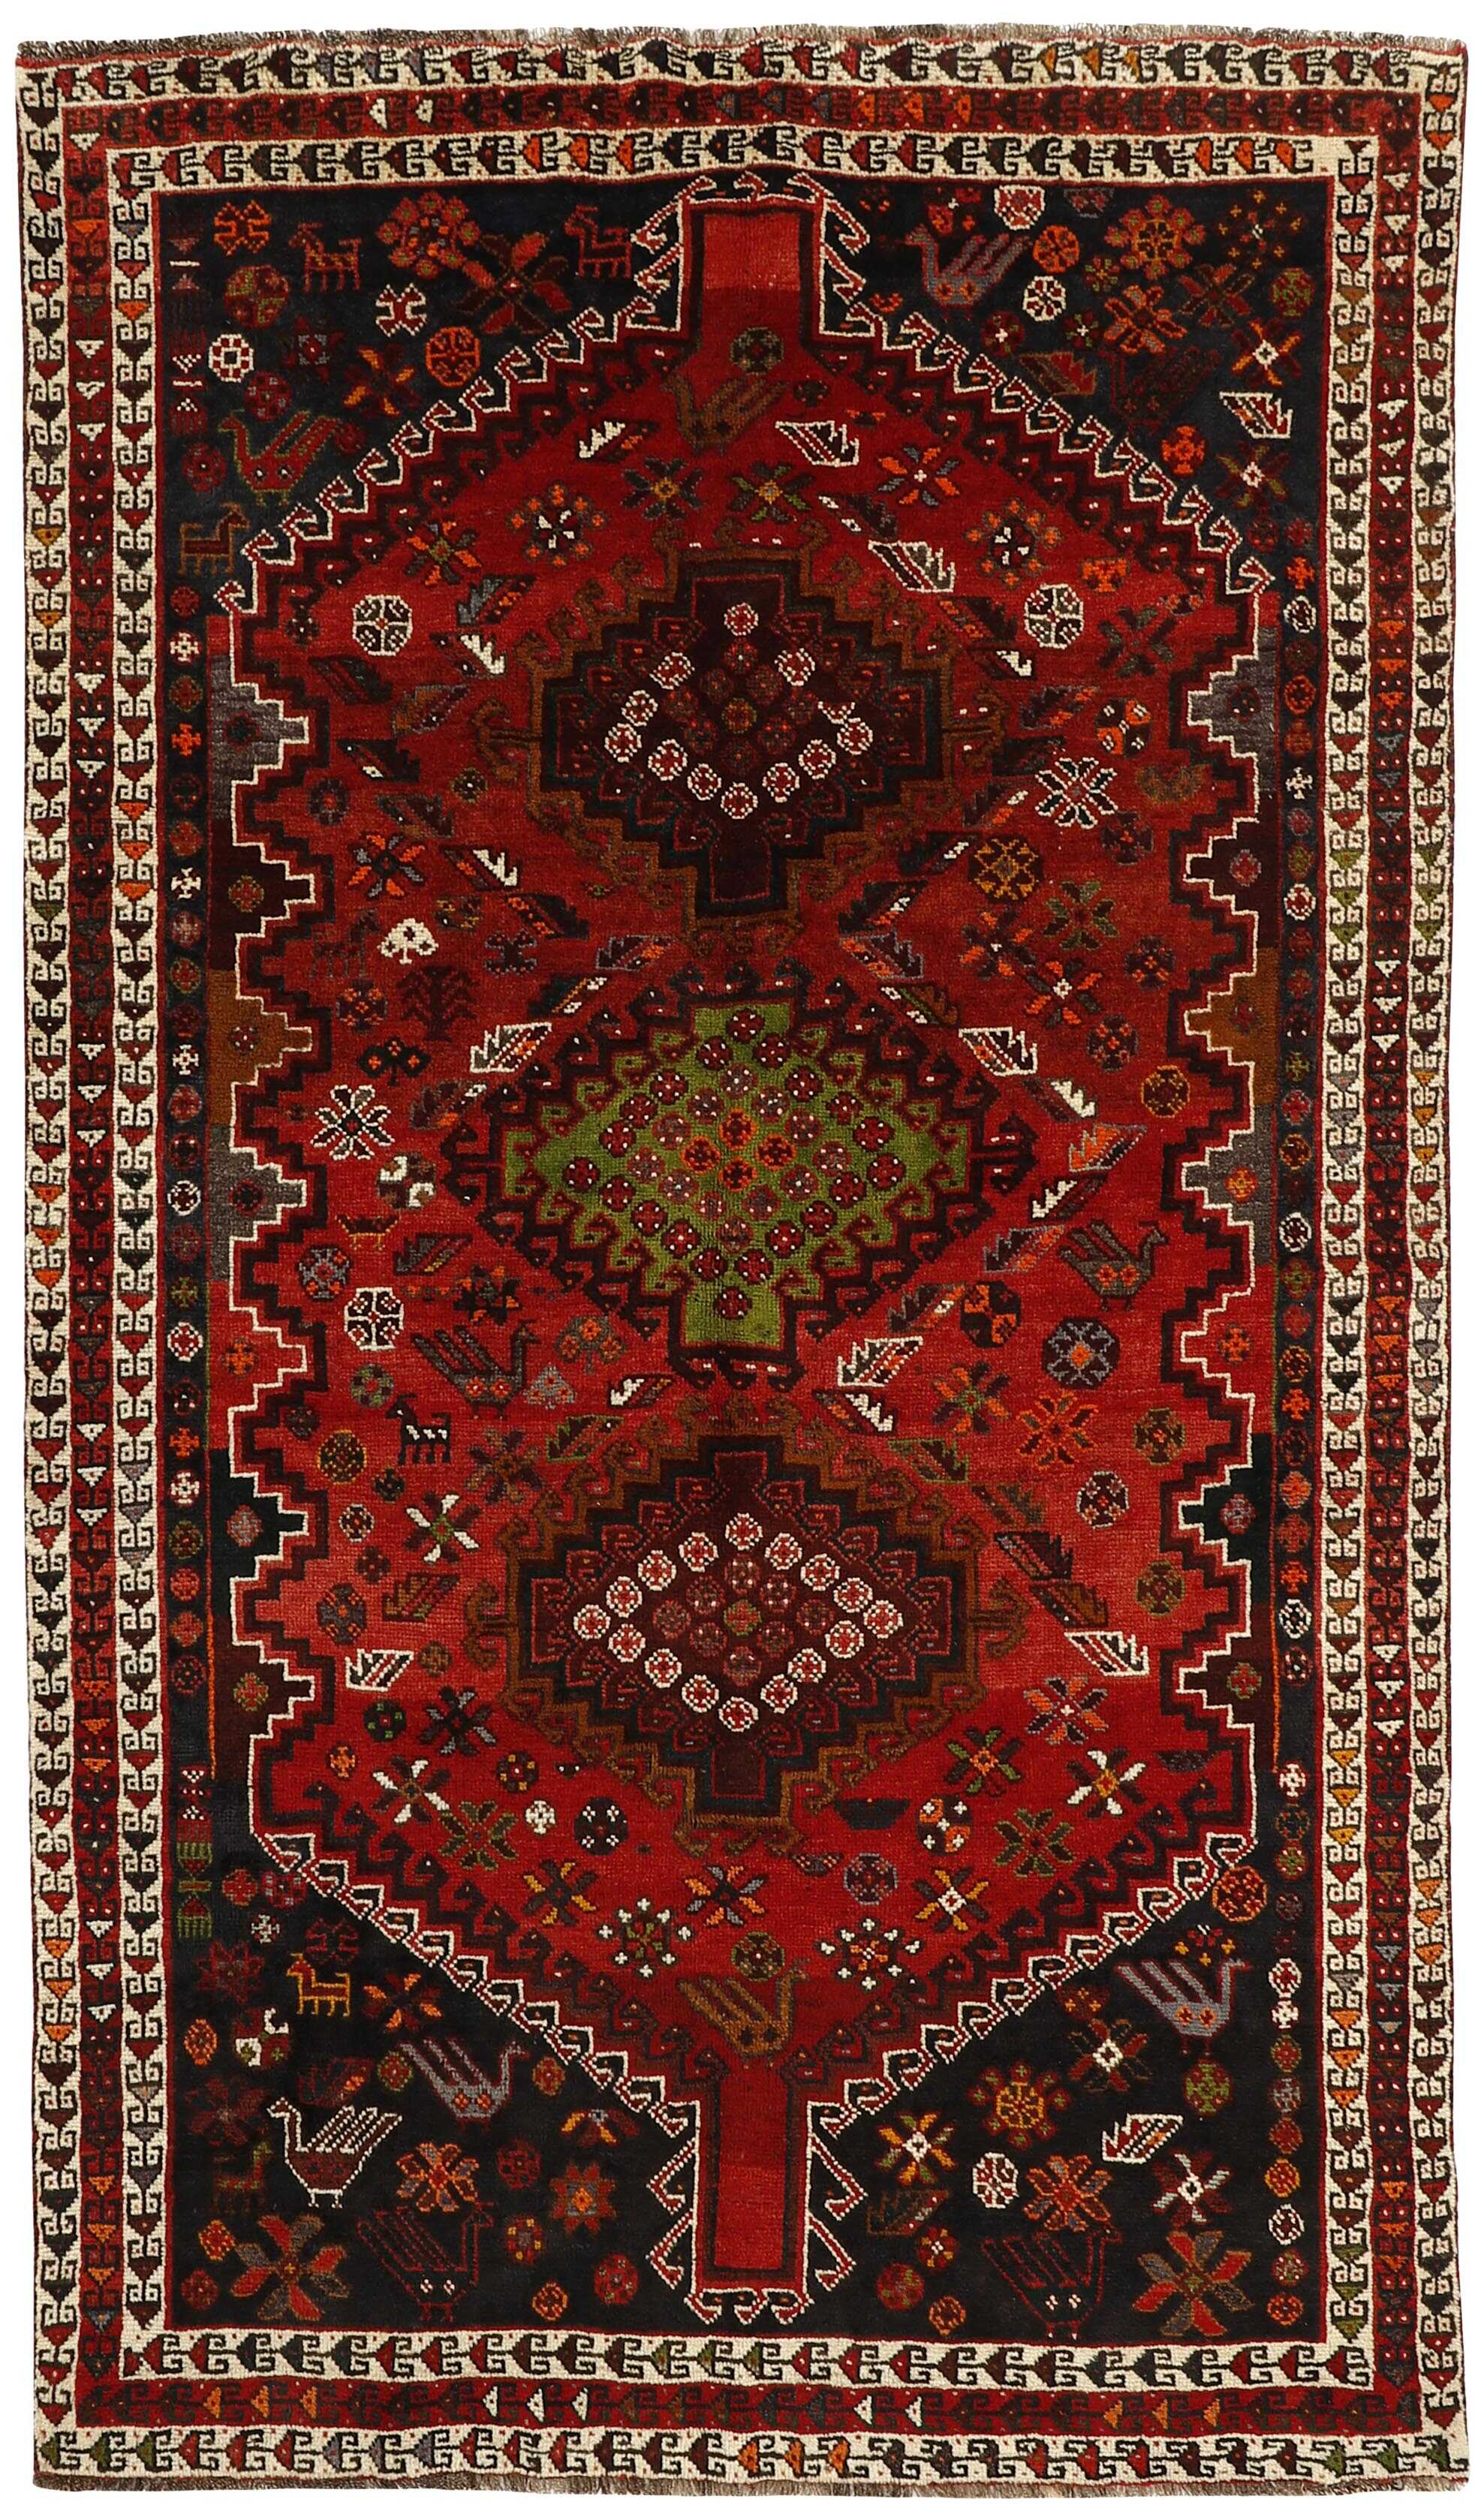 Authentic persian rug with a traditional tribal geometric pattern in red and black